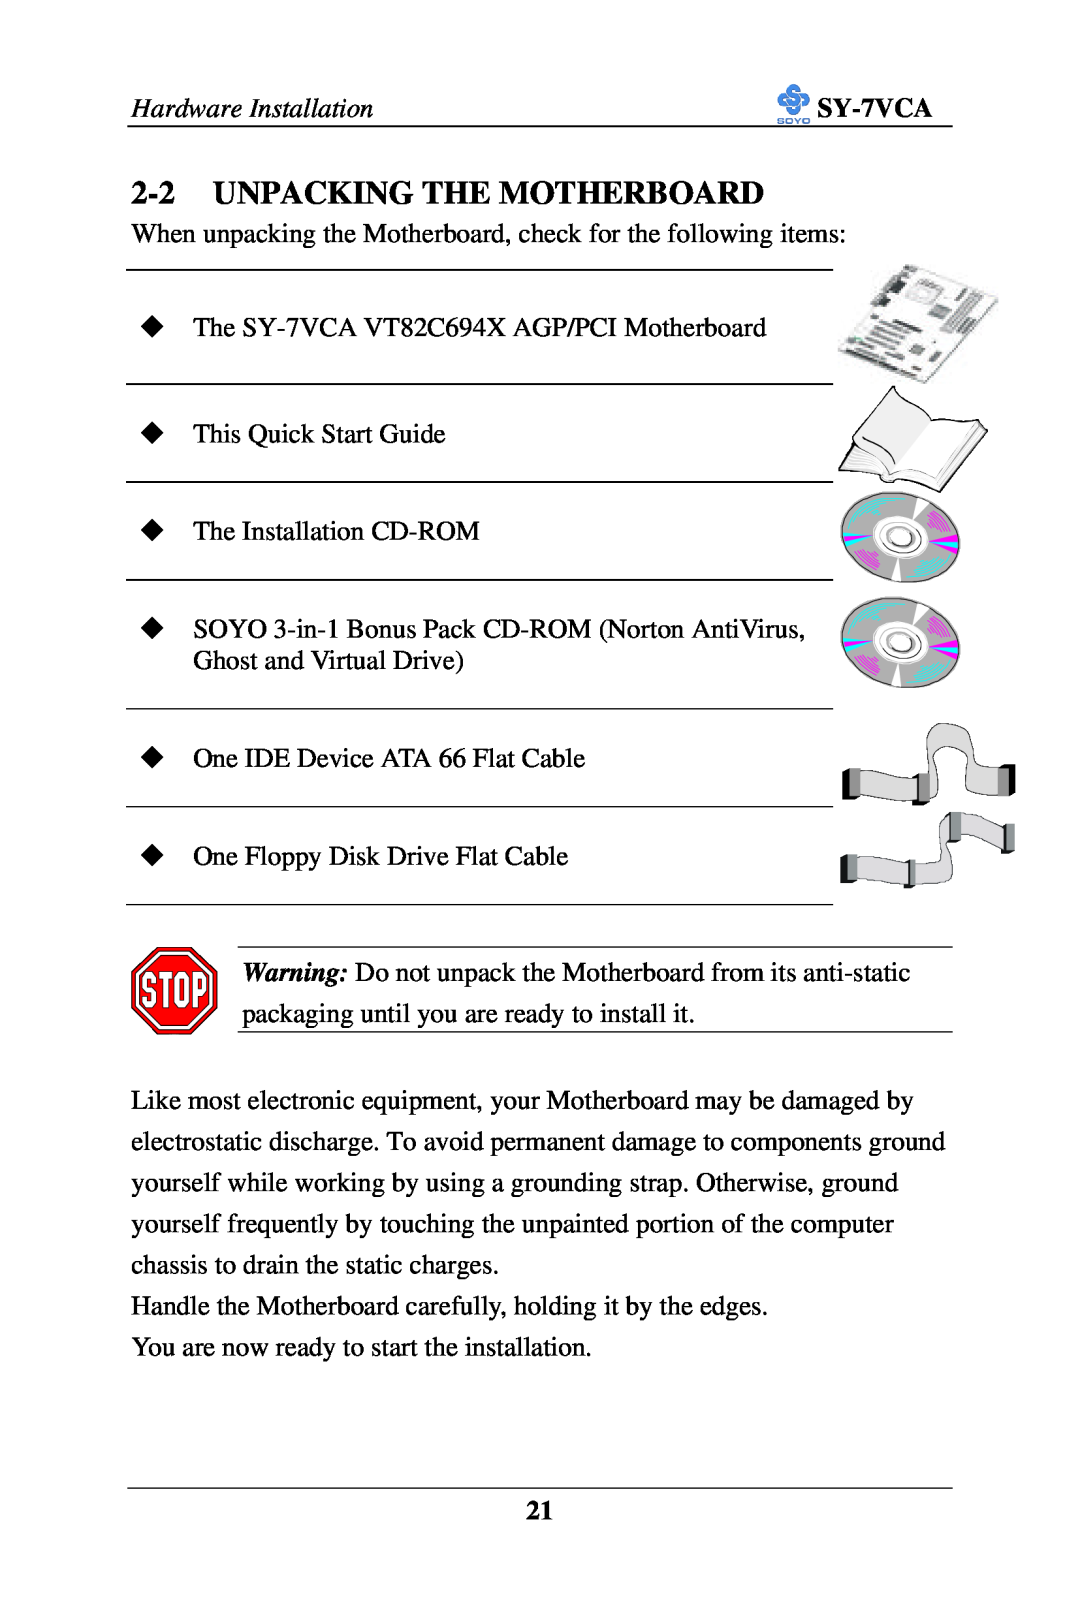 SOYO SY-7VCA user manual Unpacking The Motherboard 